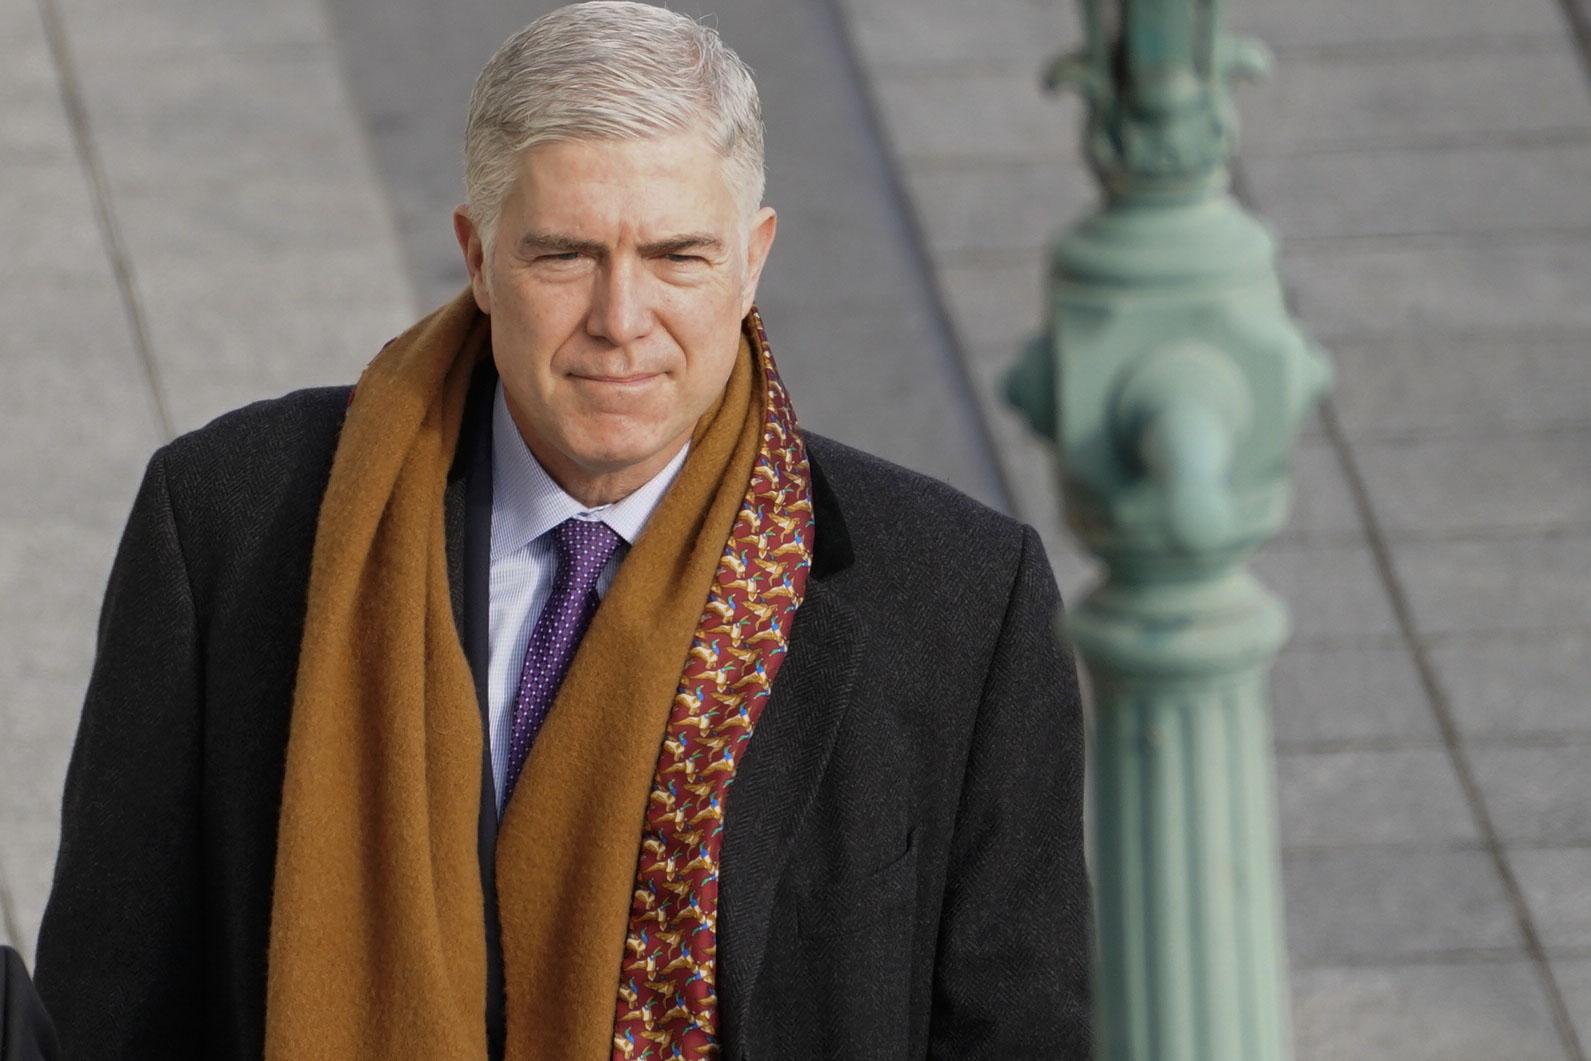 Gorsuch wearing a scarf and a suit and a soot-eating grin.